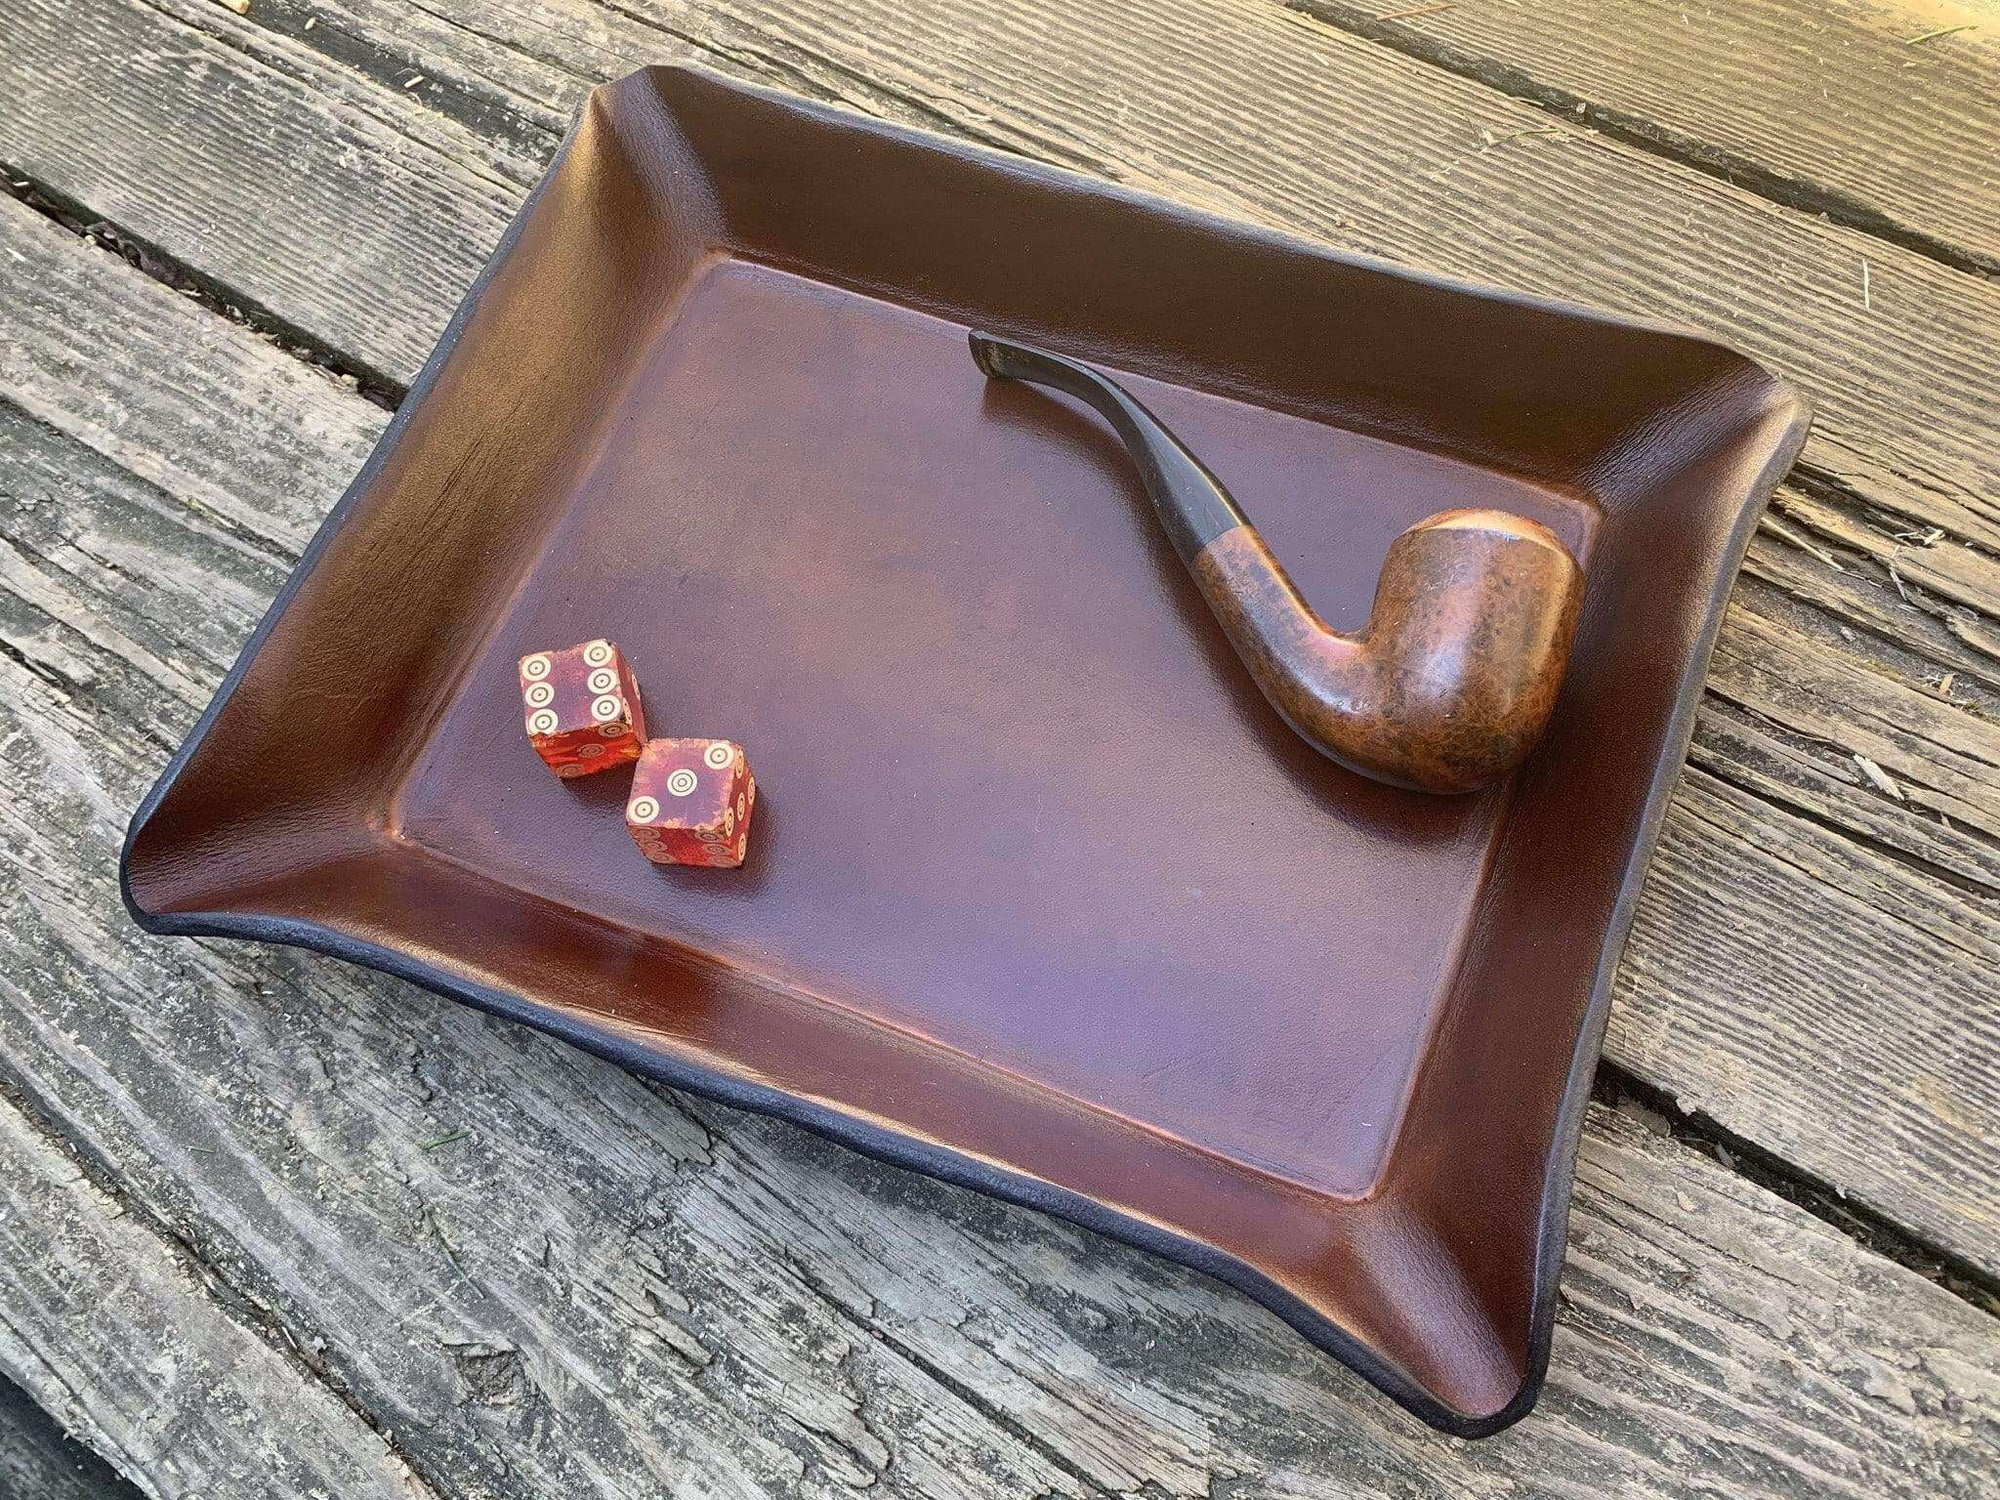 Leather valet tray for pipe display.